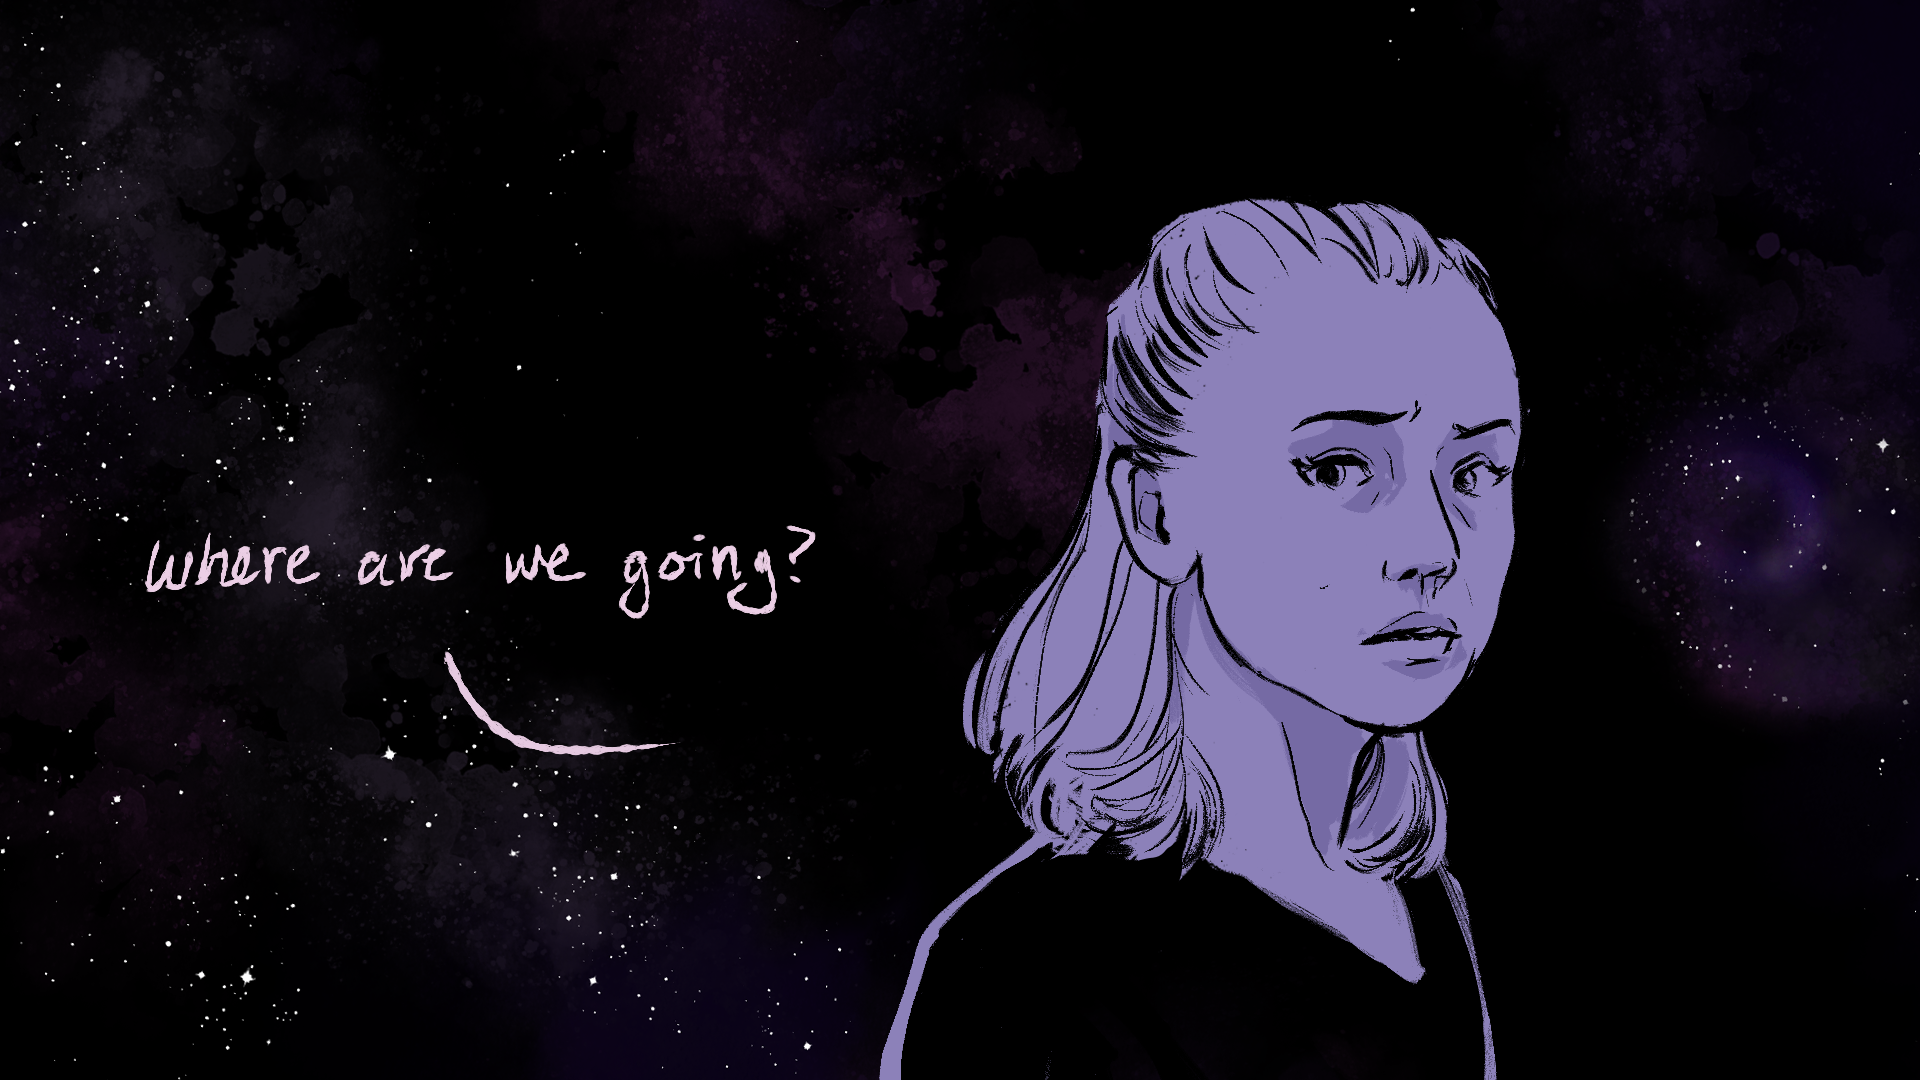 Rey glances over at Ben, concern still etched on her face. "Where are we going?"